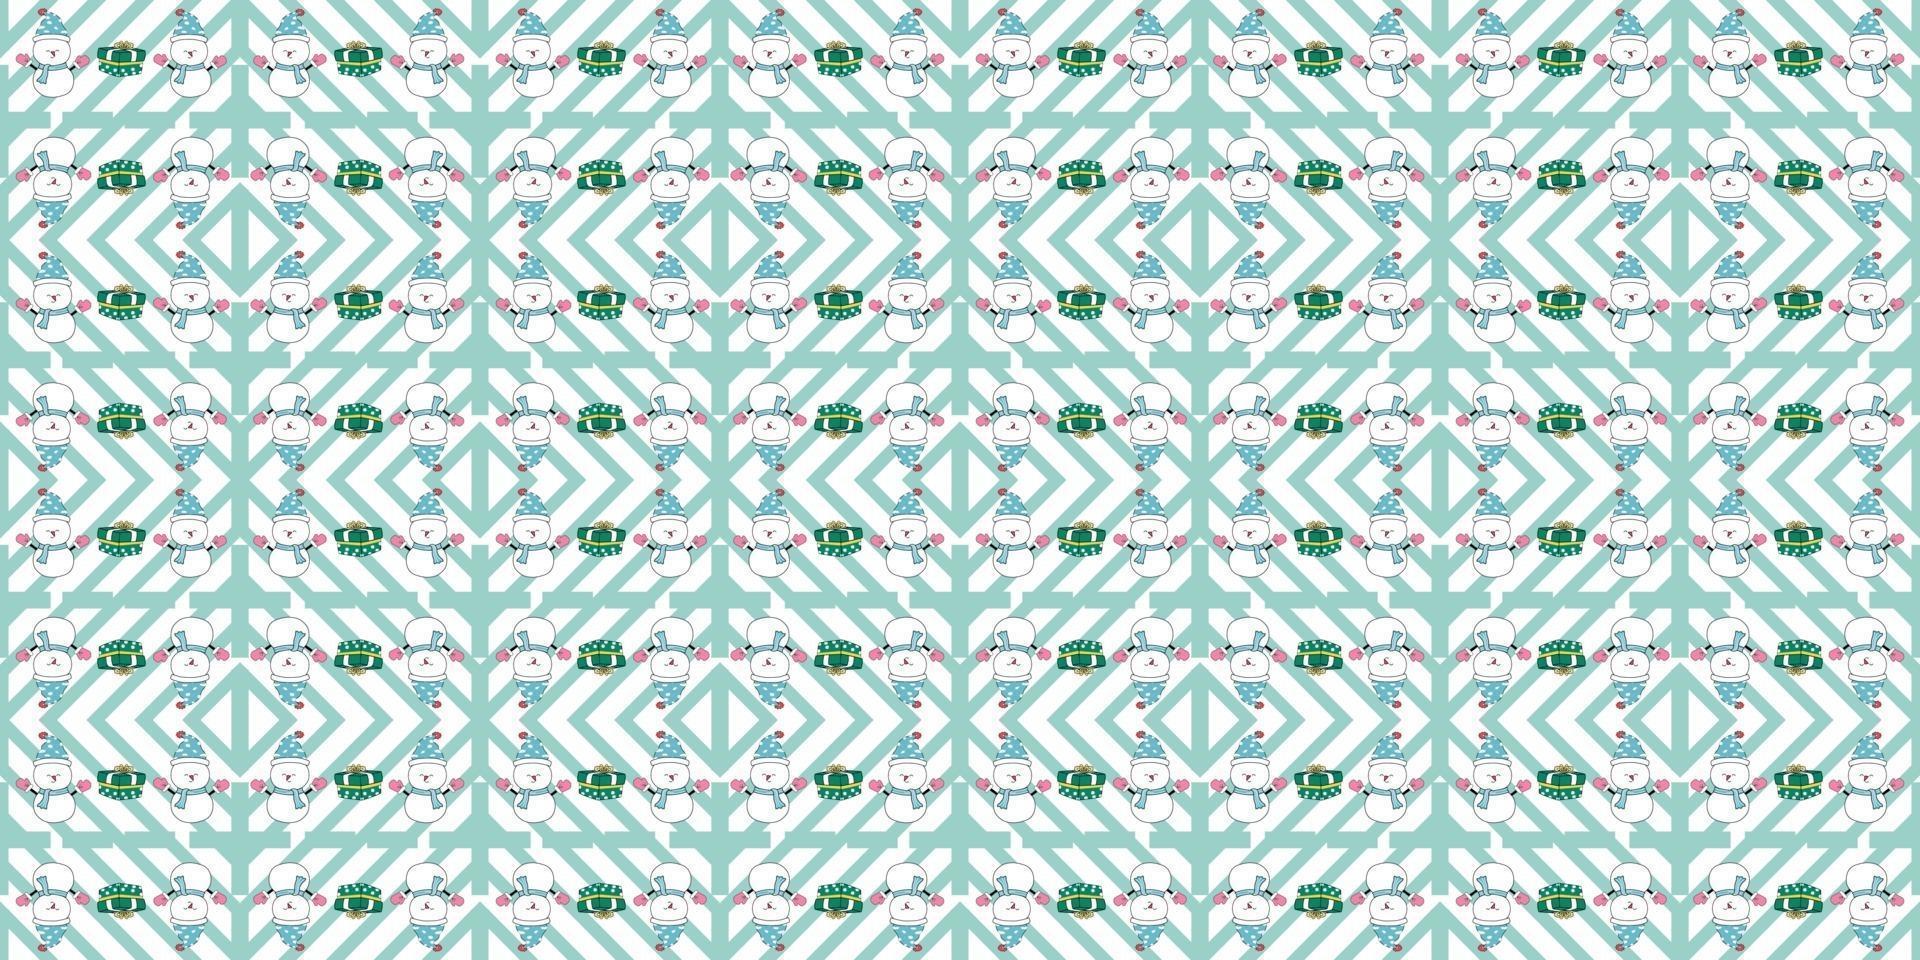 Christmas patterns designed in doodle style in bright colors vector